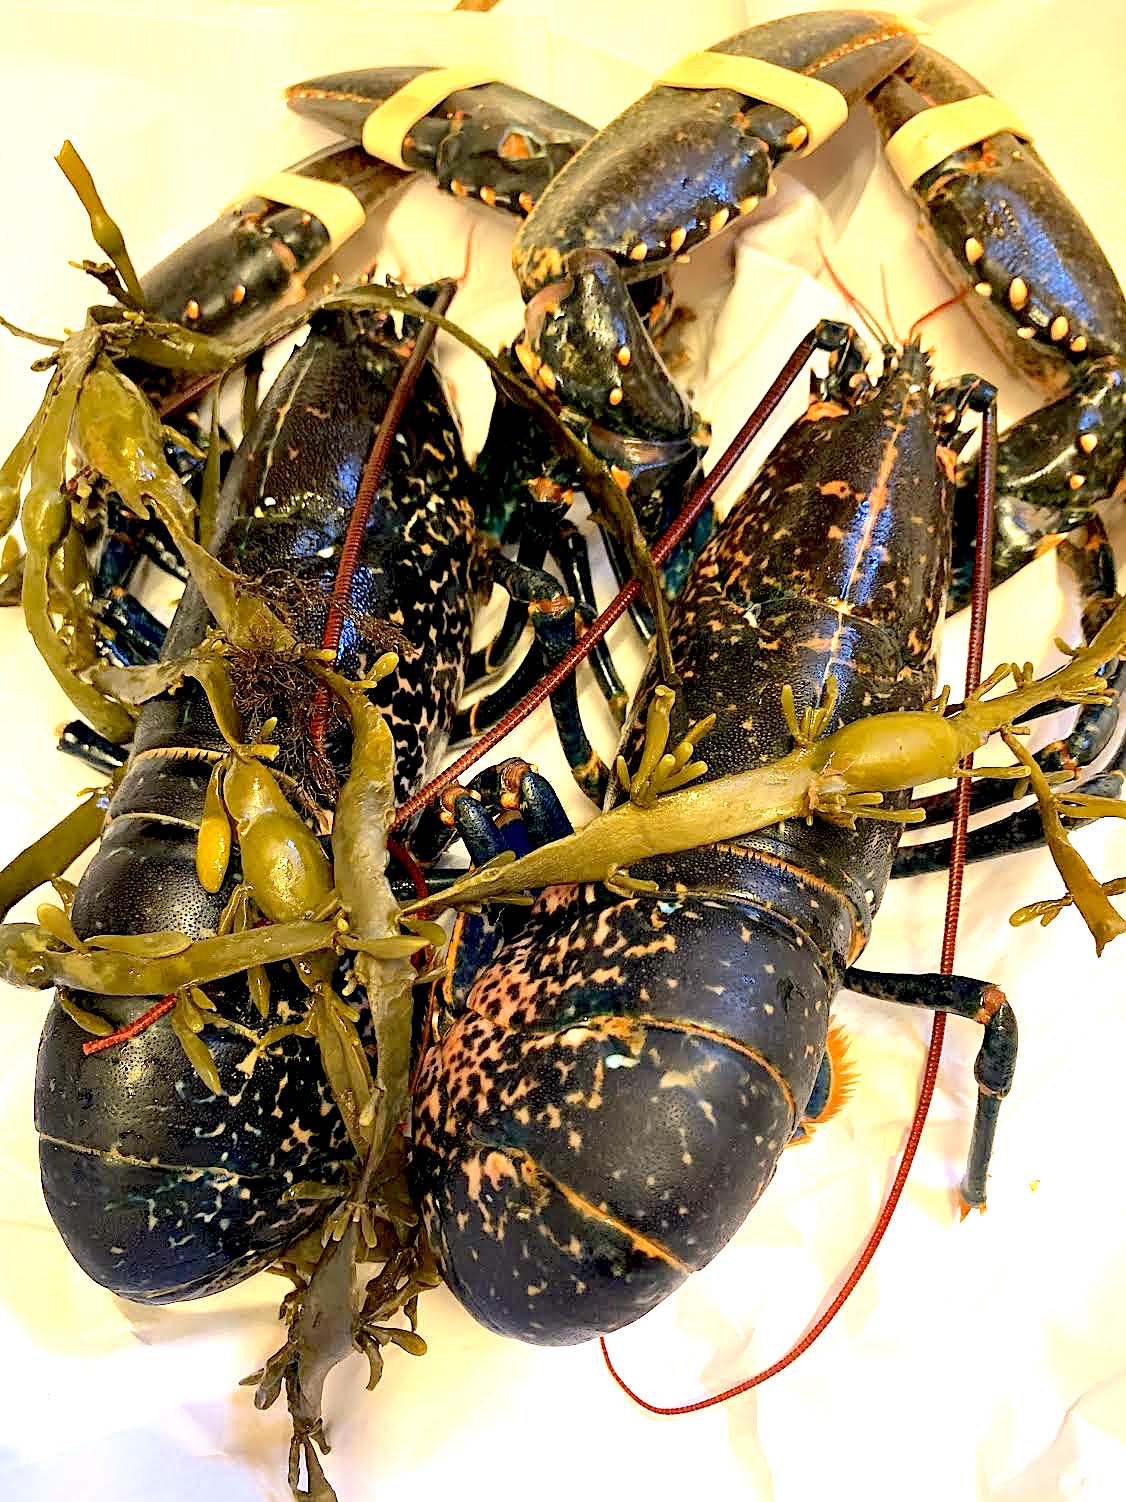 A pair of live lobsters